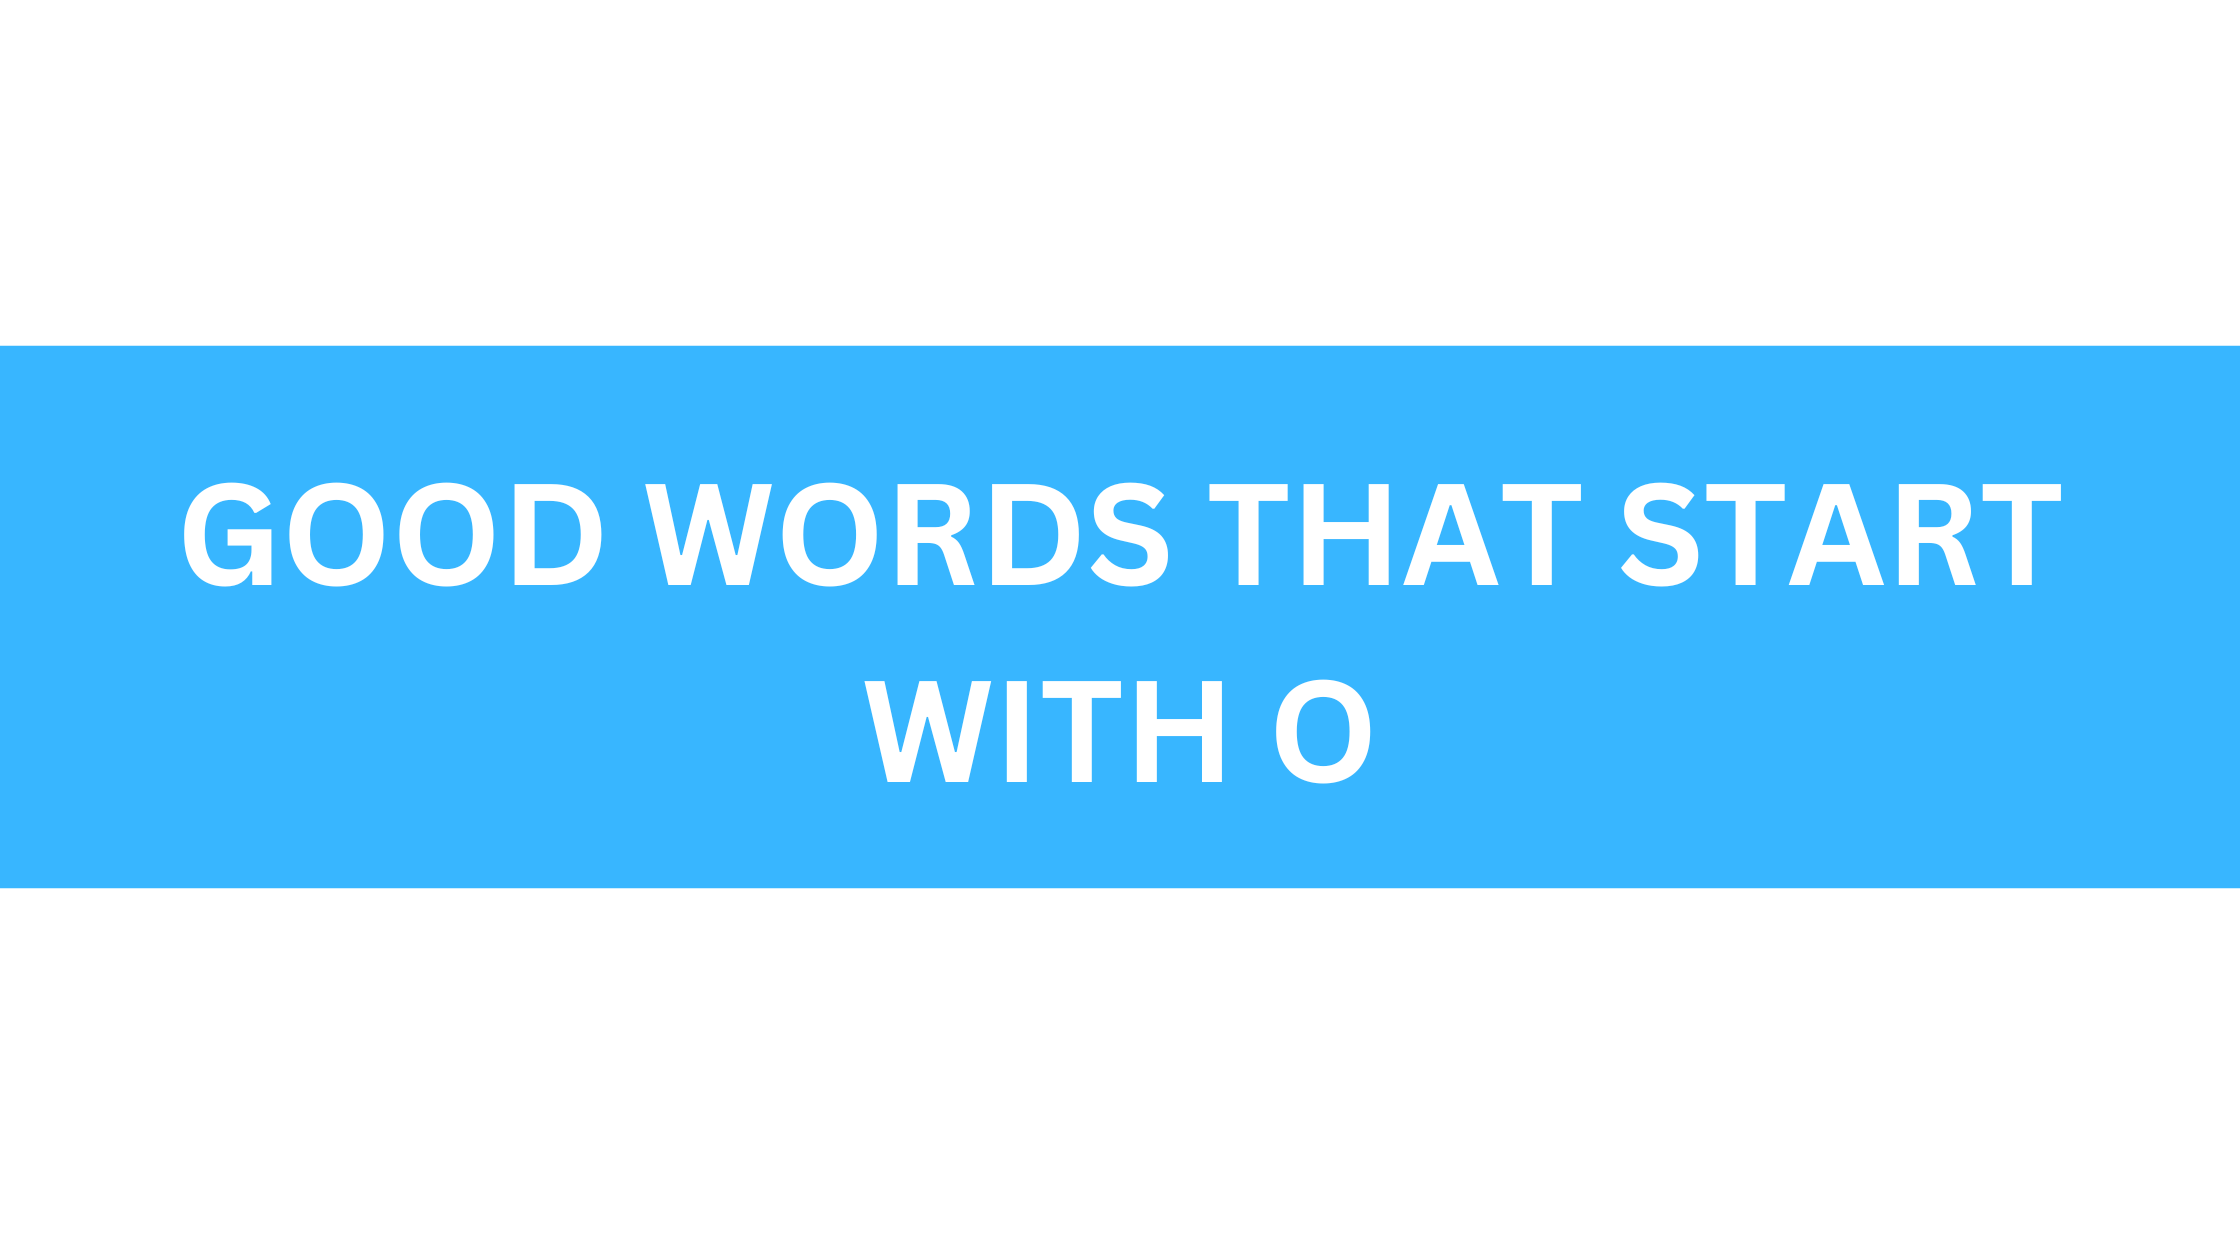 good words that start with o